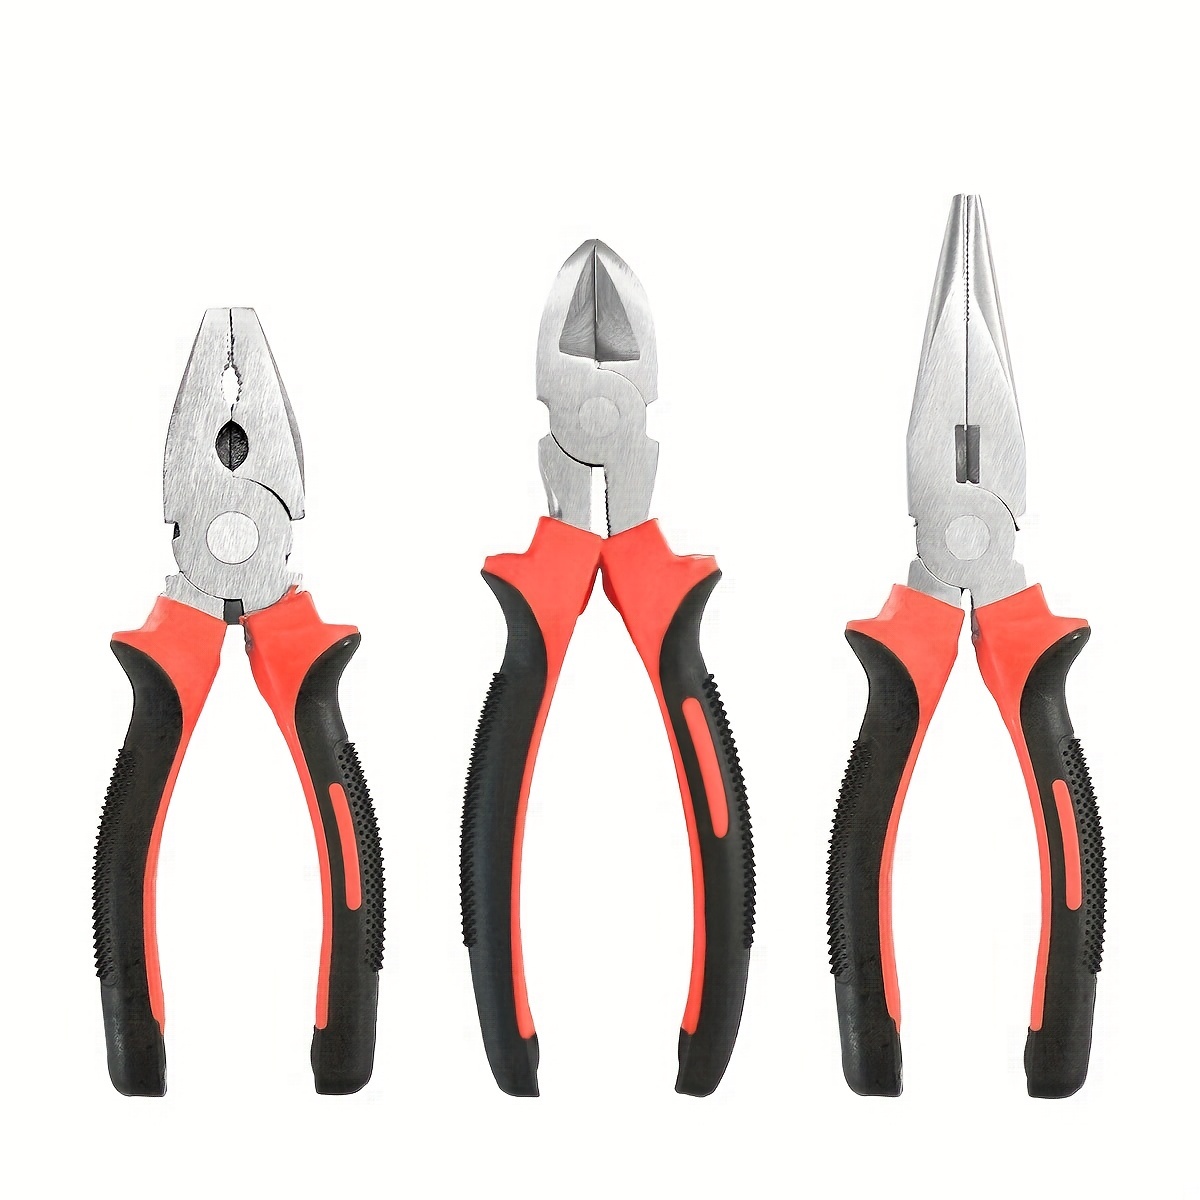 5pcs Small Pliers Set Industrial Grade 5-inch Mini Pliers,for Repair  Handmade DIY Jewelry Pliers,wire Cutter,Round Nose Pliers, Pointed Nose  Pliers